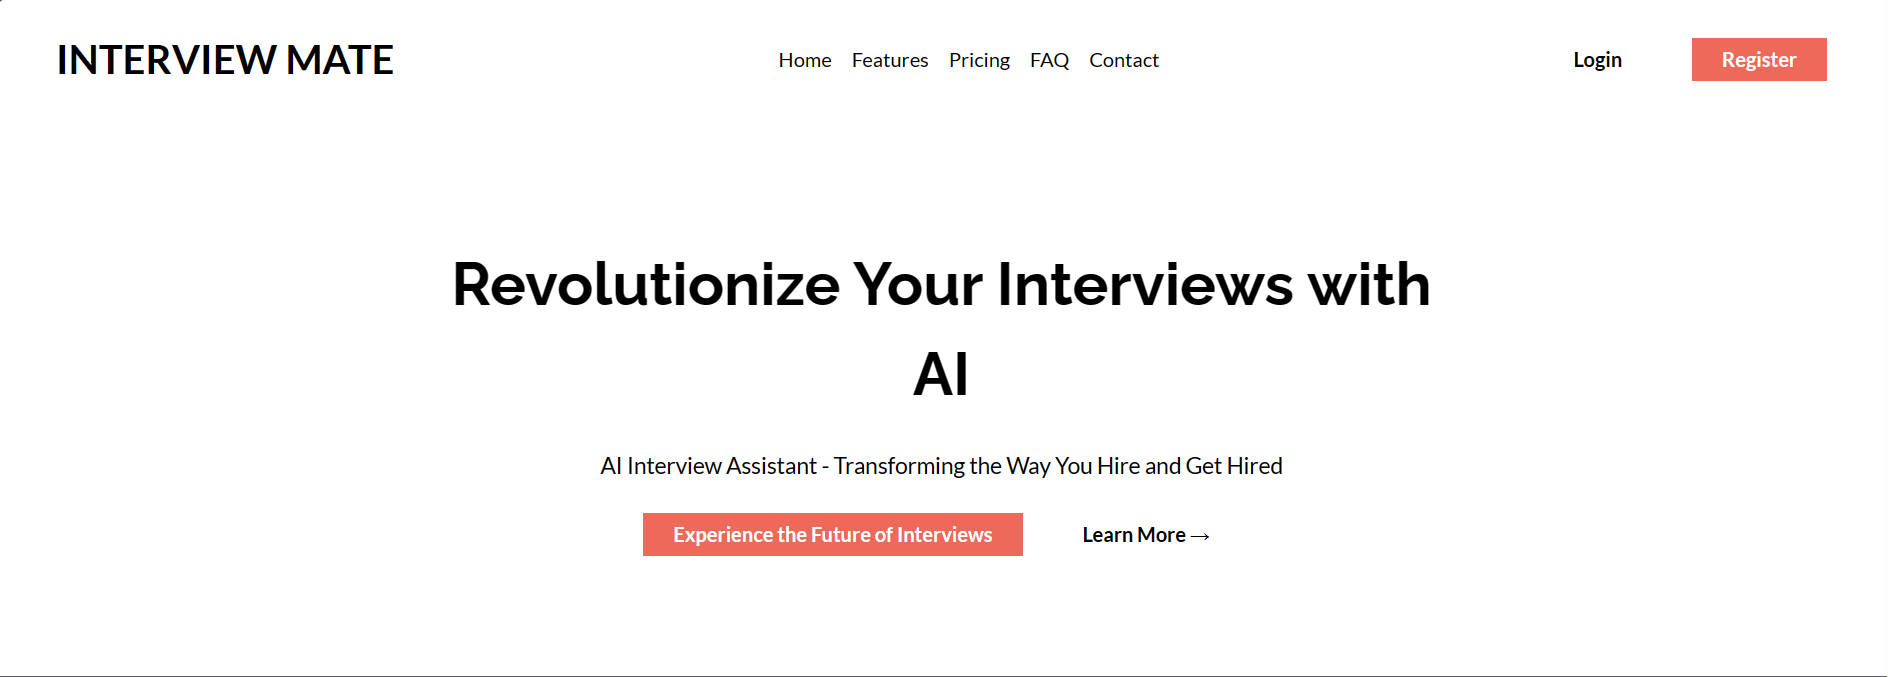 AI based interview assistant